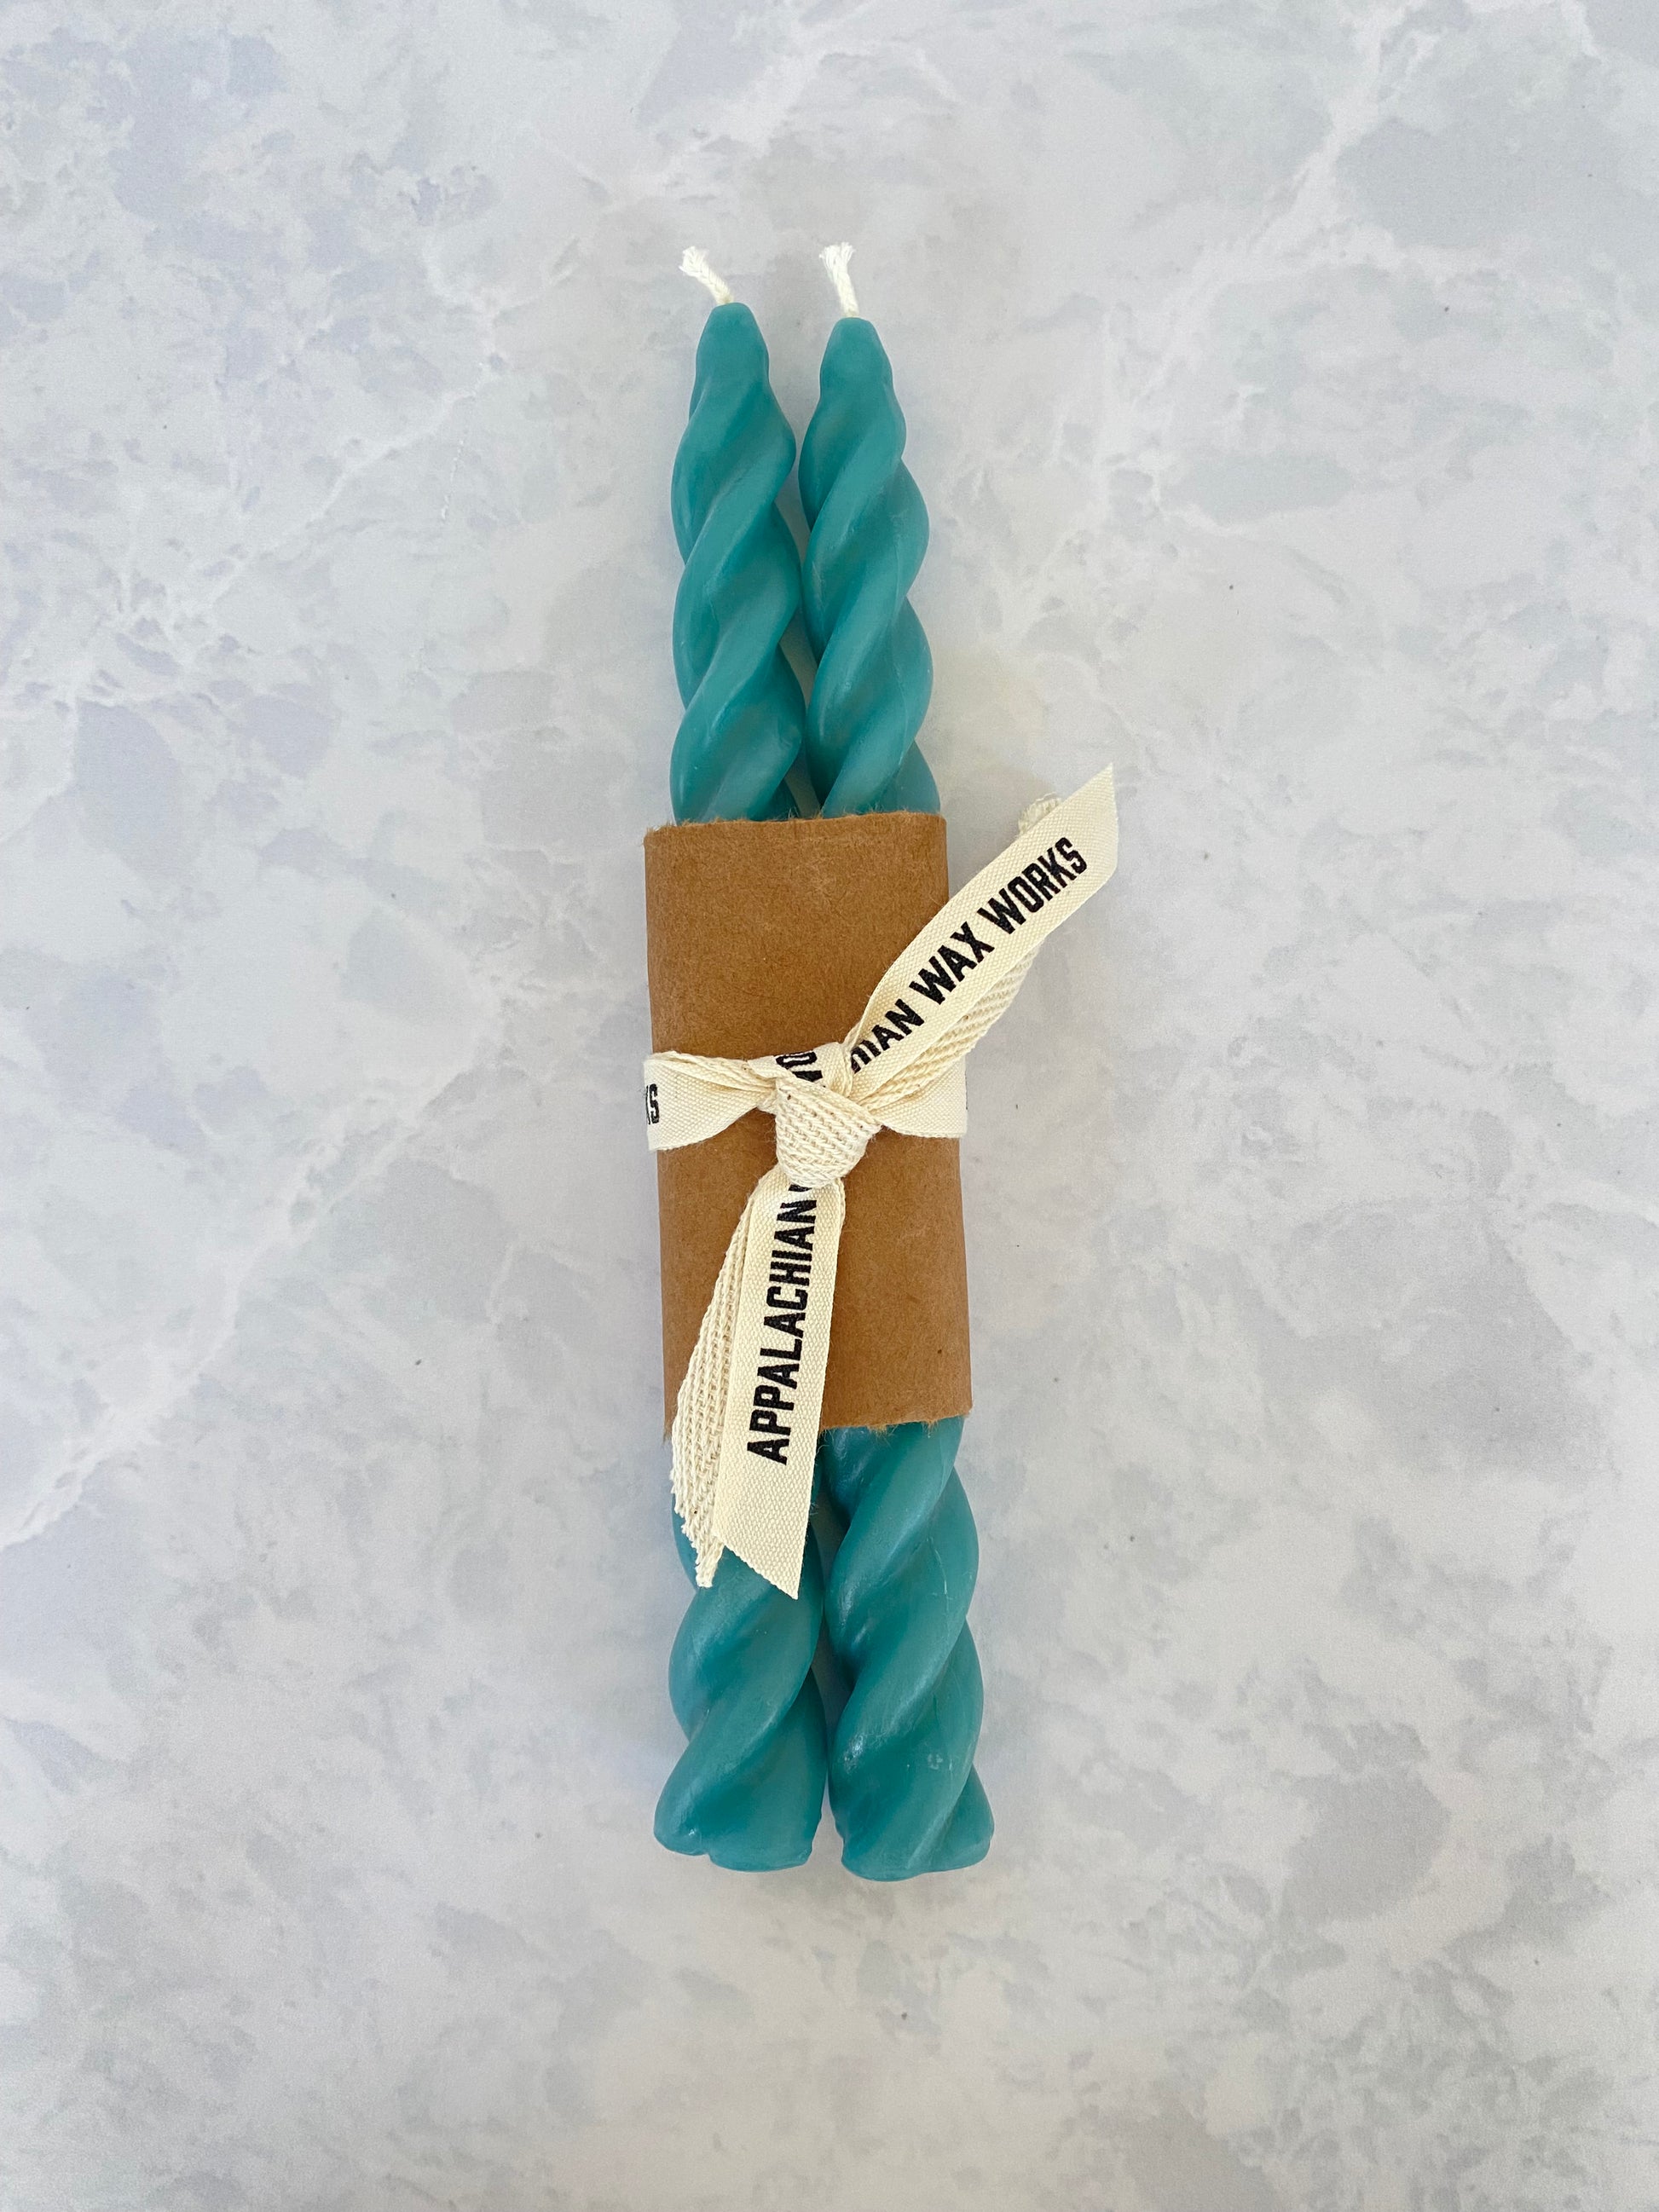 Beeswax Spiral Taper Candle in Teal Blue Color for Sale